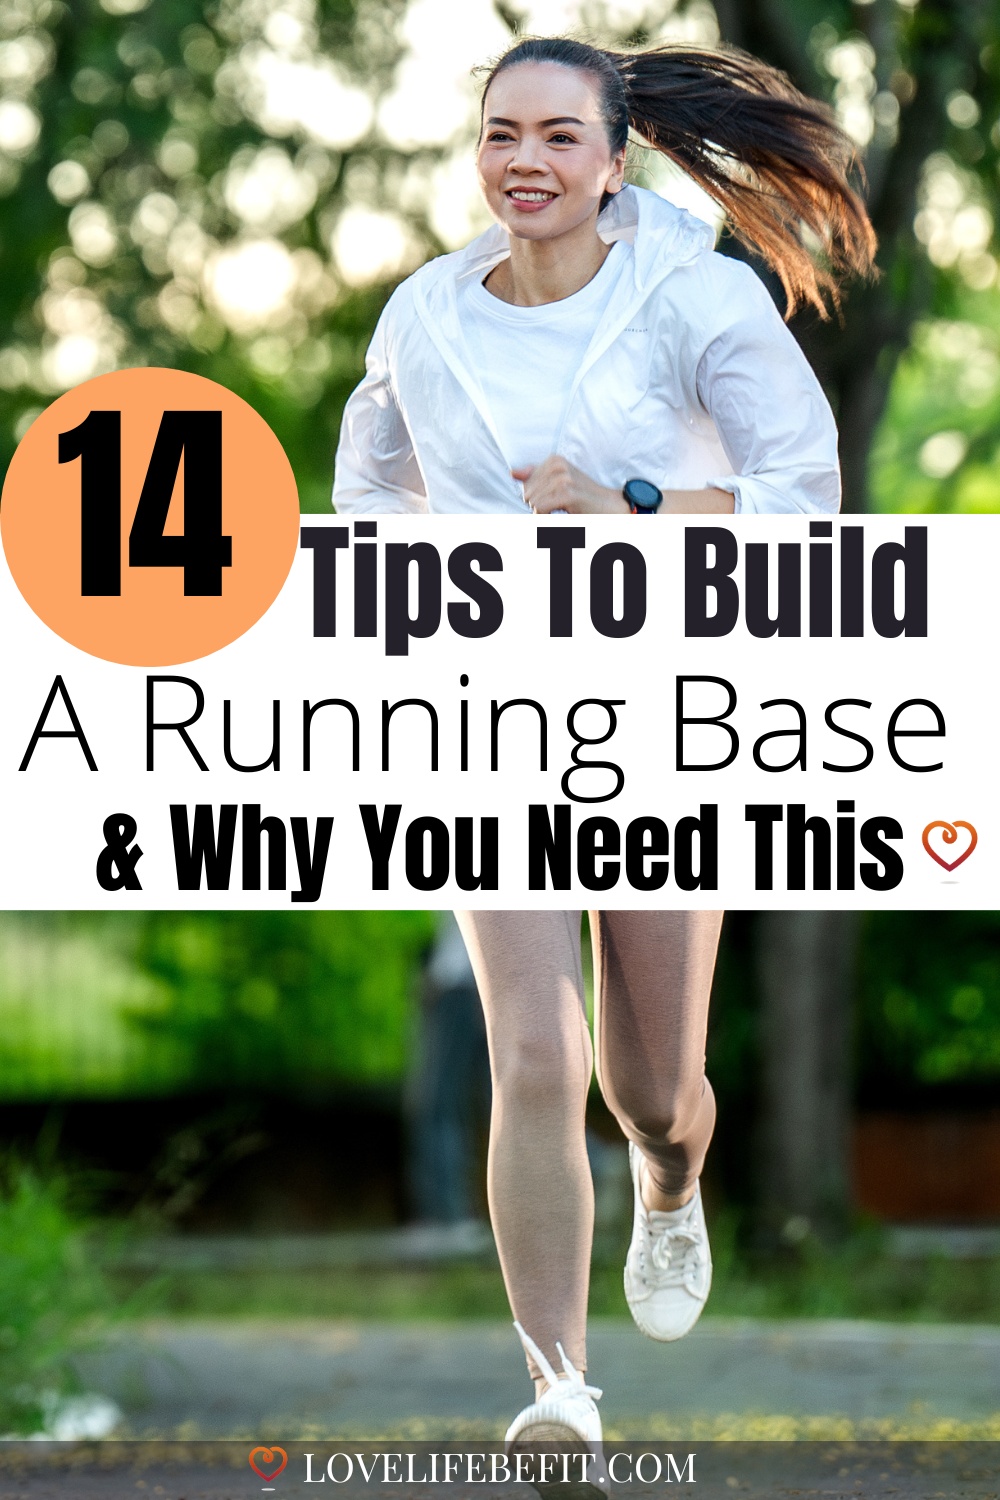 Tips to build a running base